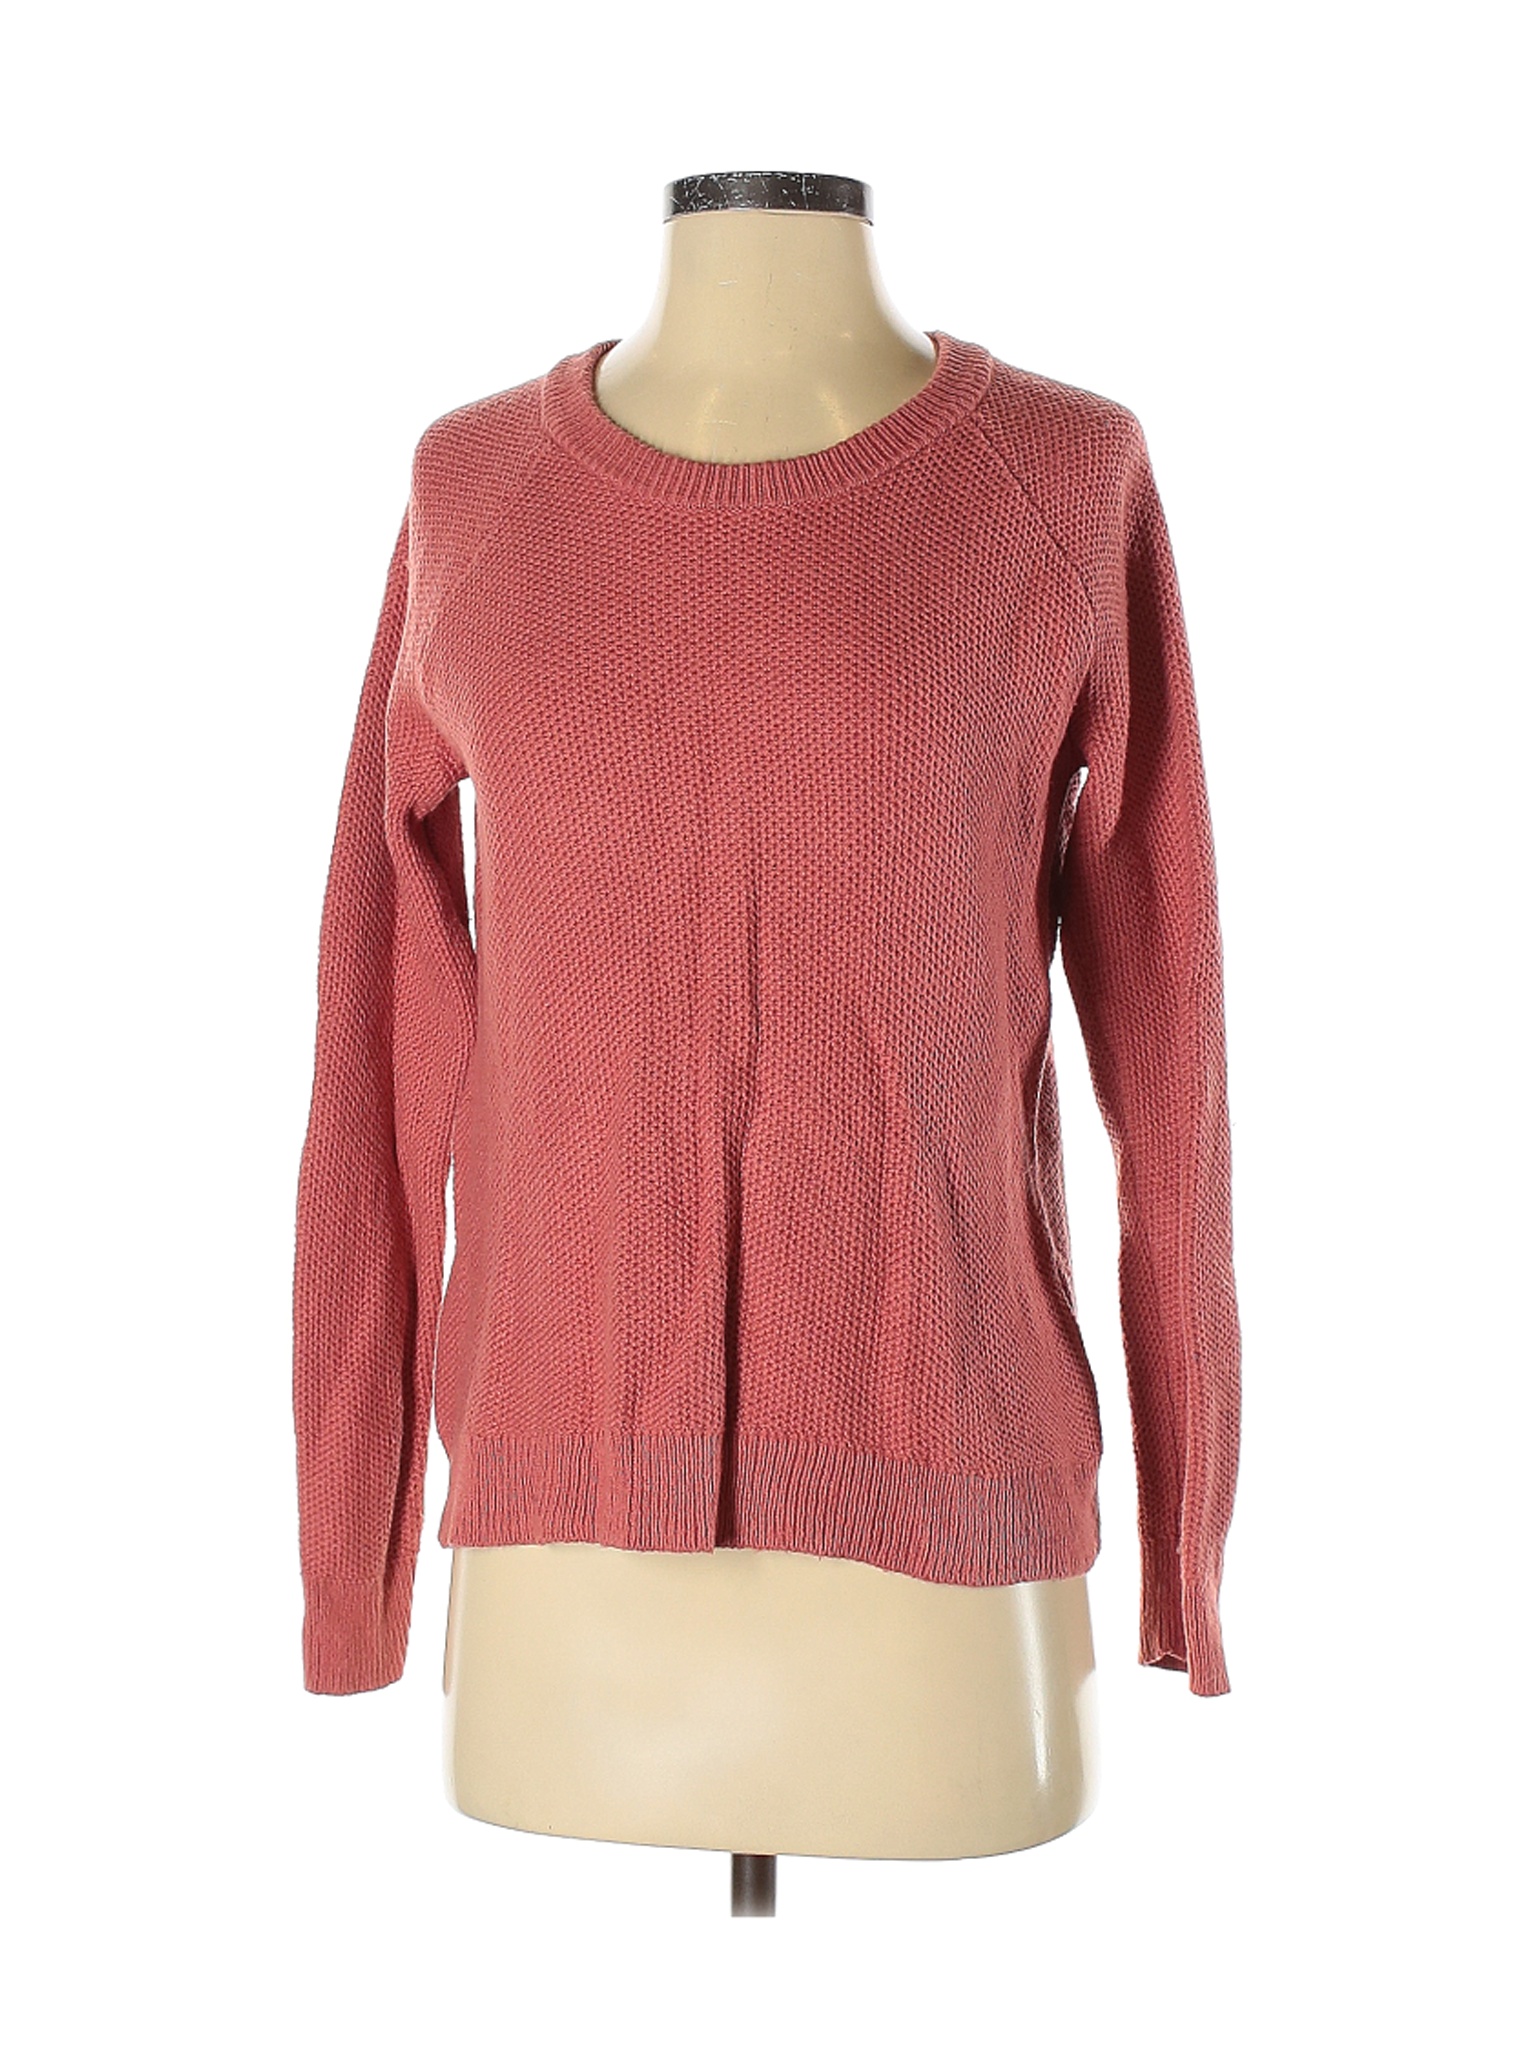 Madewell Color Block Maroon Pink Pullover Sweater Size S - 74% off ...